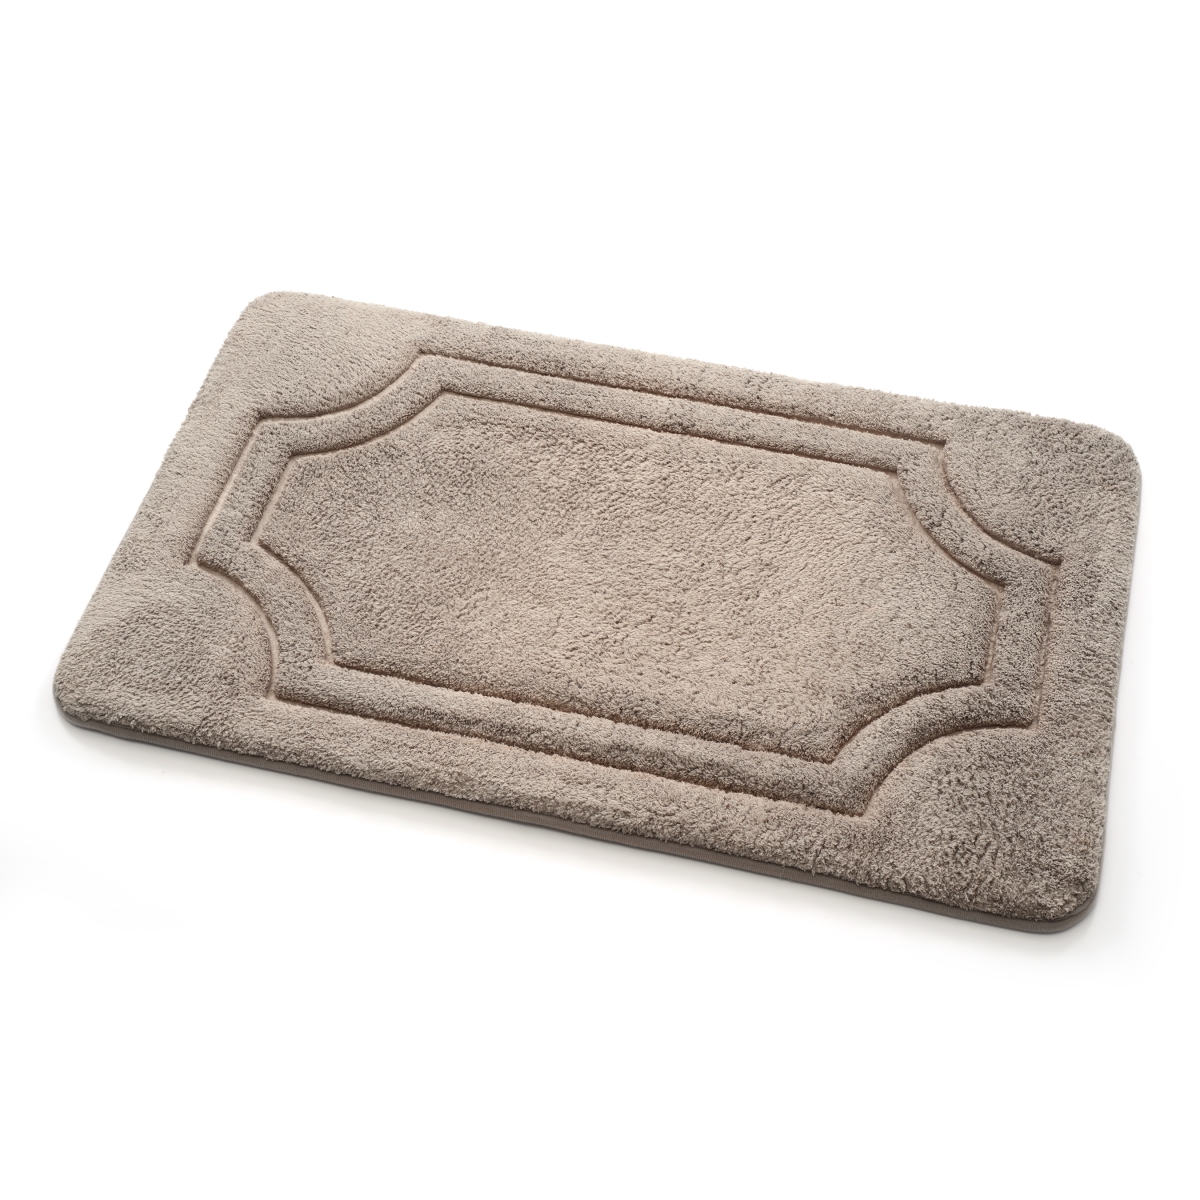 Bfdm-24c749-12 17 X 24 In. Luxurious Memory Foam Bath Mat With Water Shield Technology - Atmosphere Taupe